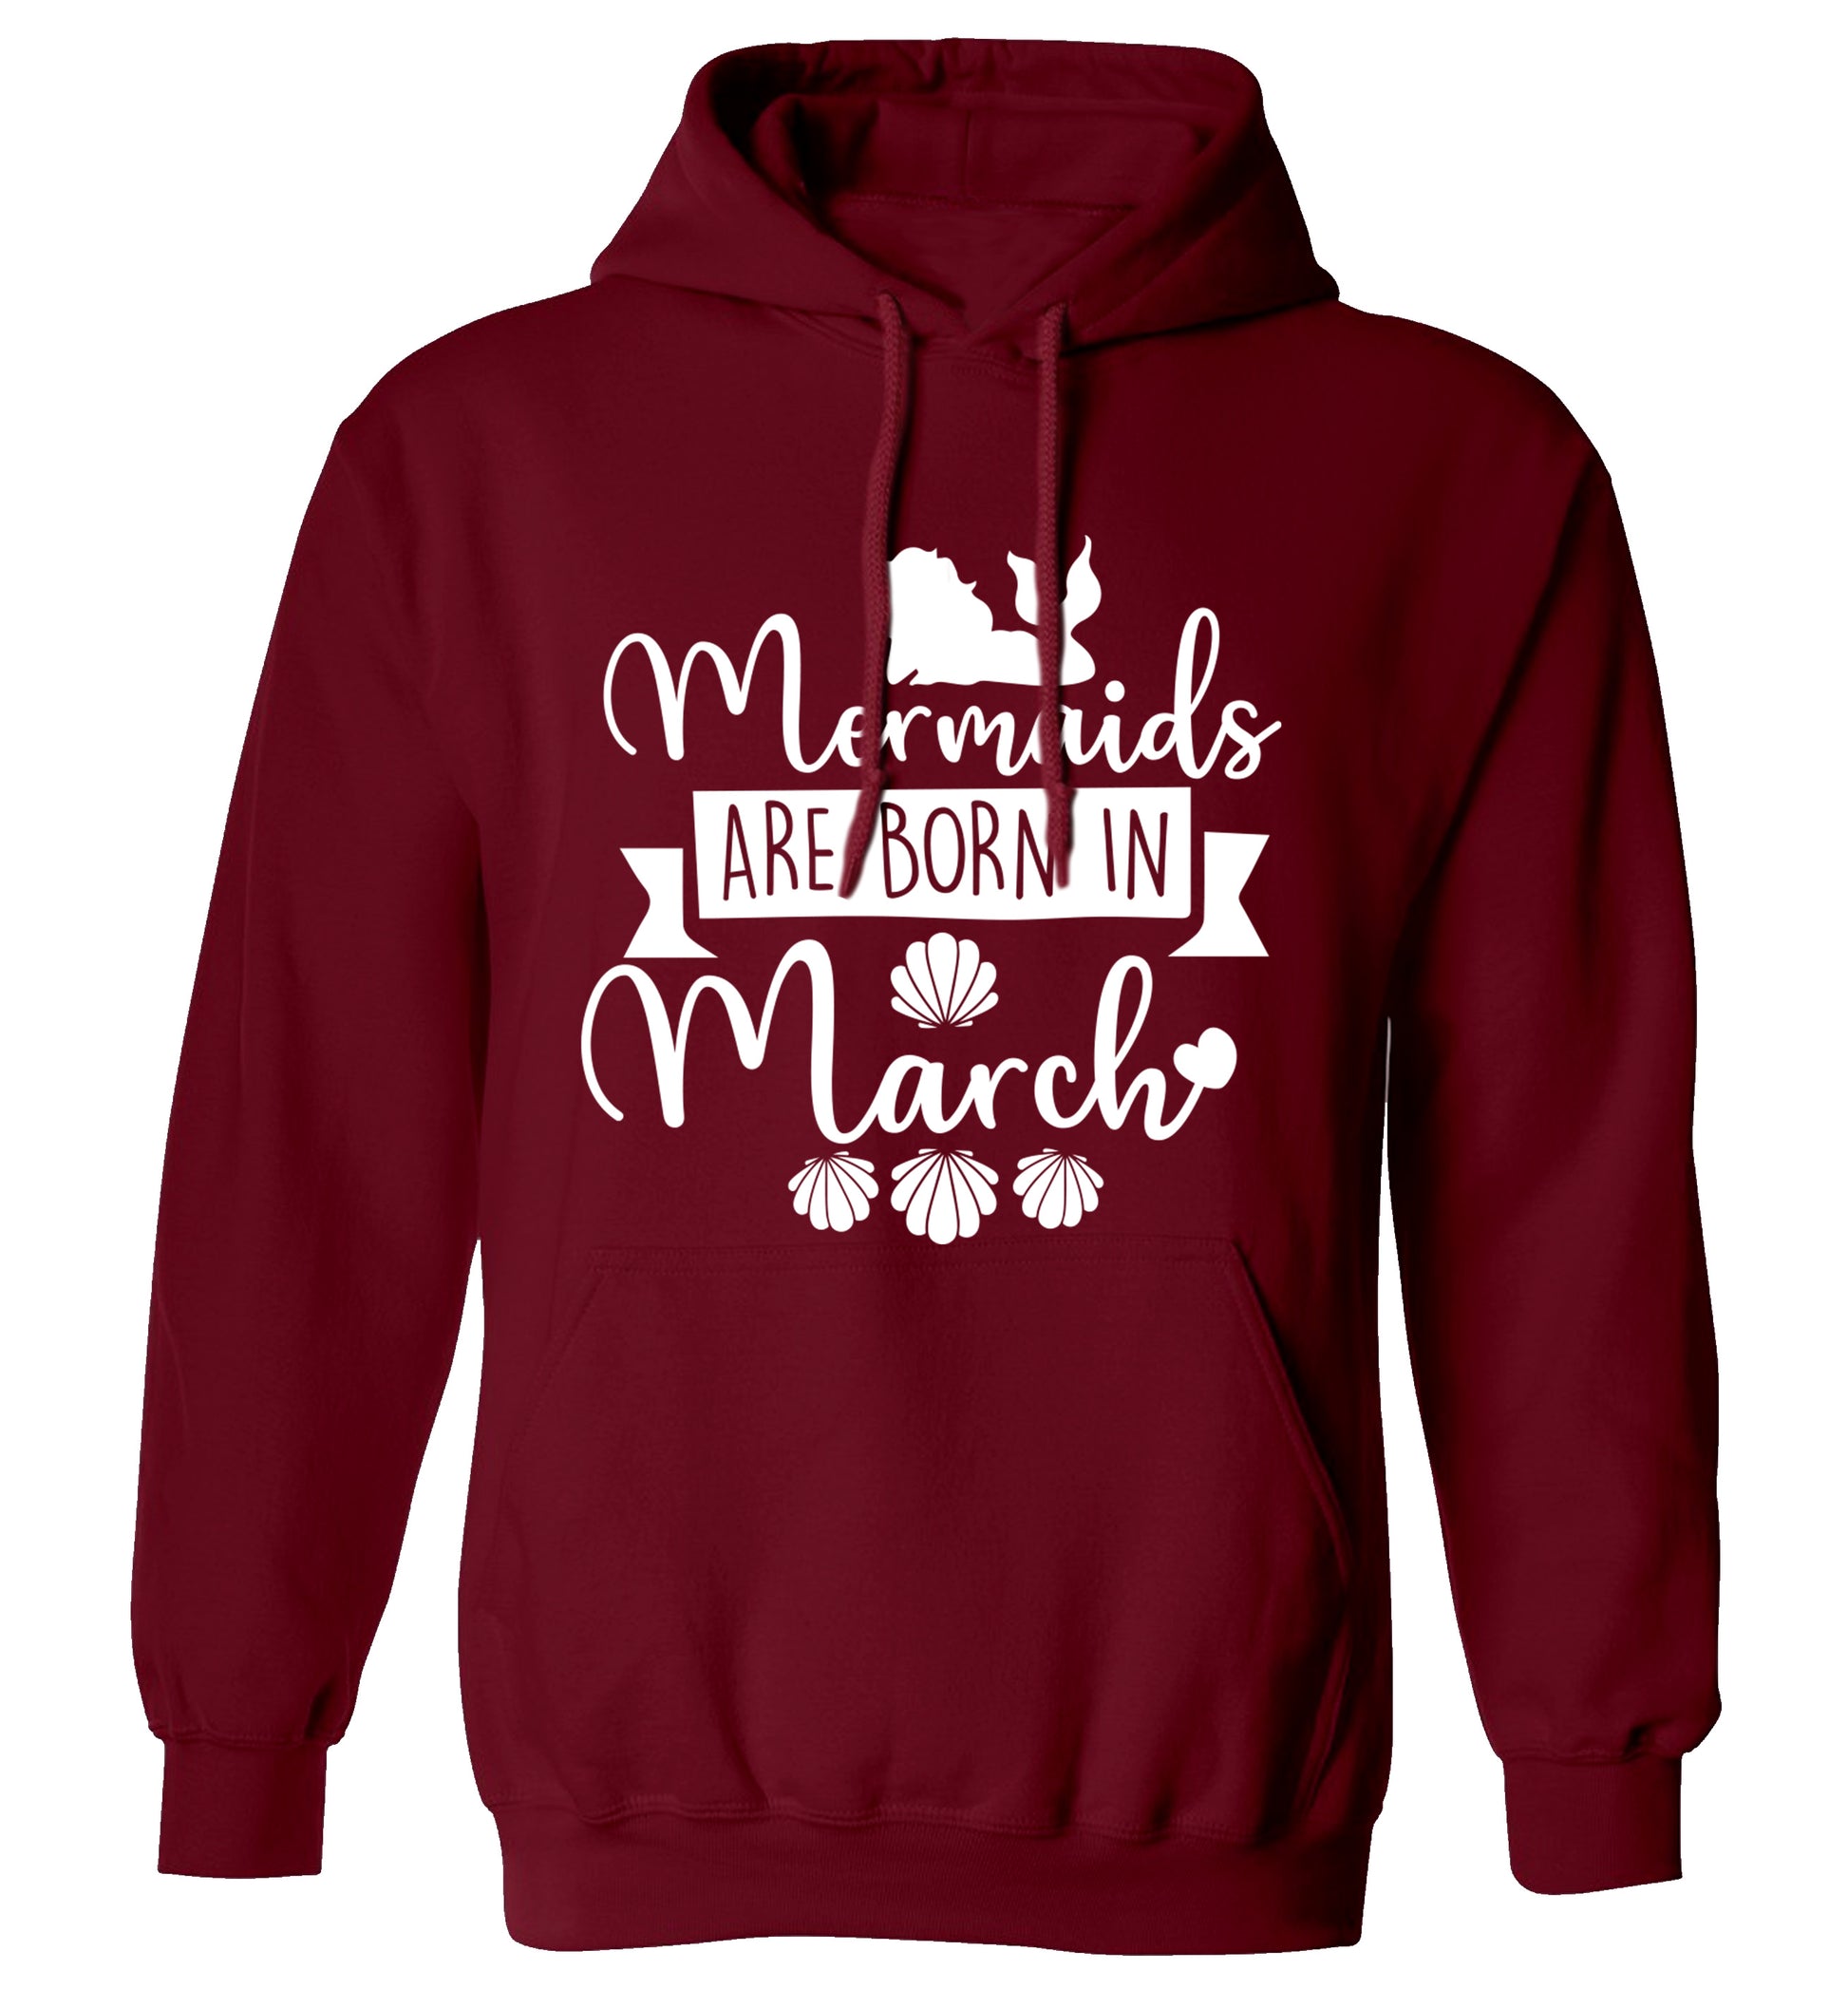 Mermaids are born in March adults unisex maroon hoodie 2XL